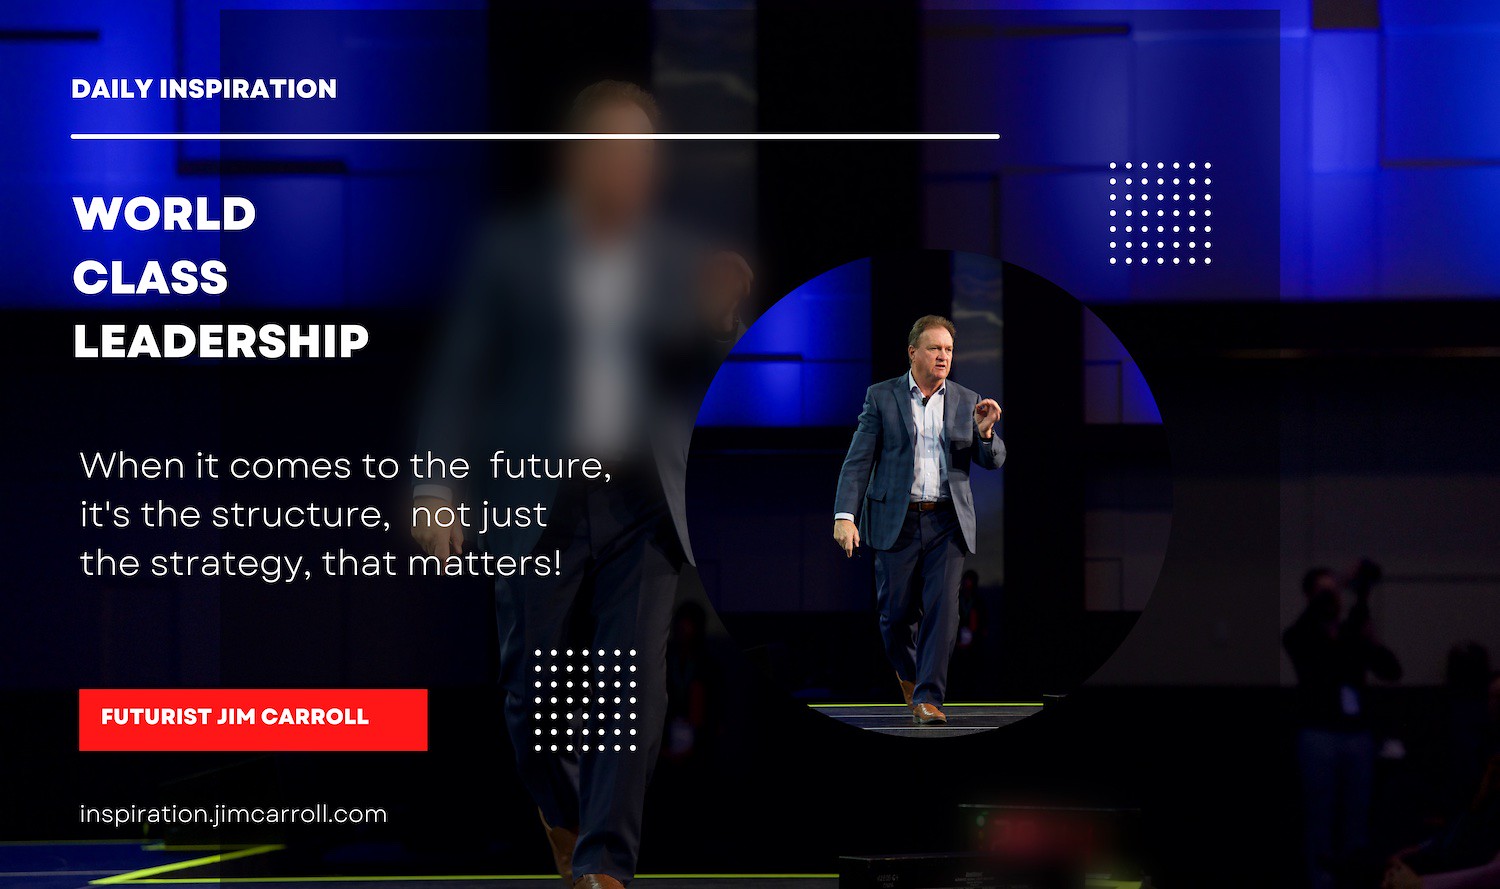 "When it comes to the future, it's the structure, not just the strategy, that matters!" - Futurist Jim Carroll